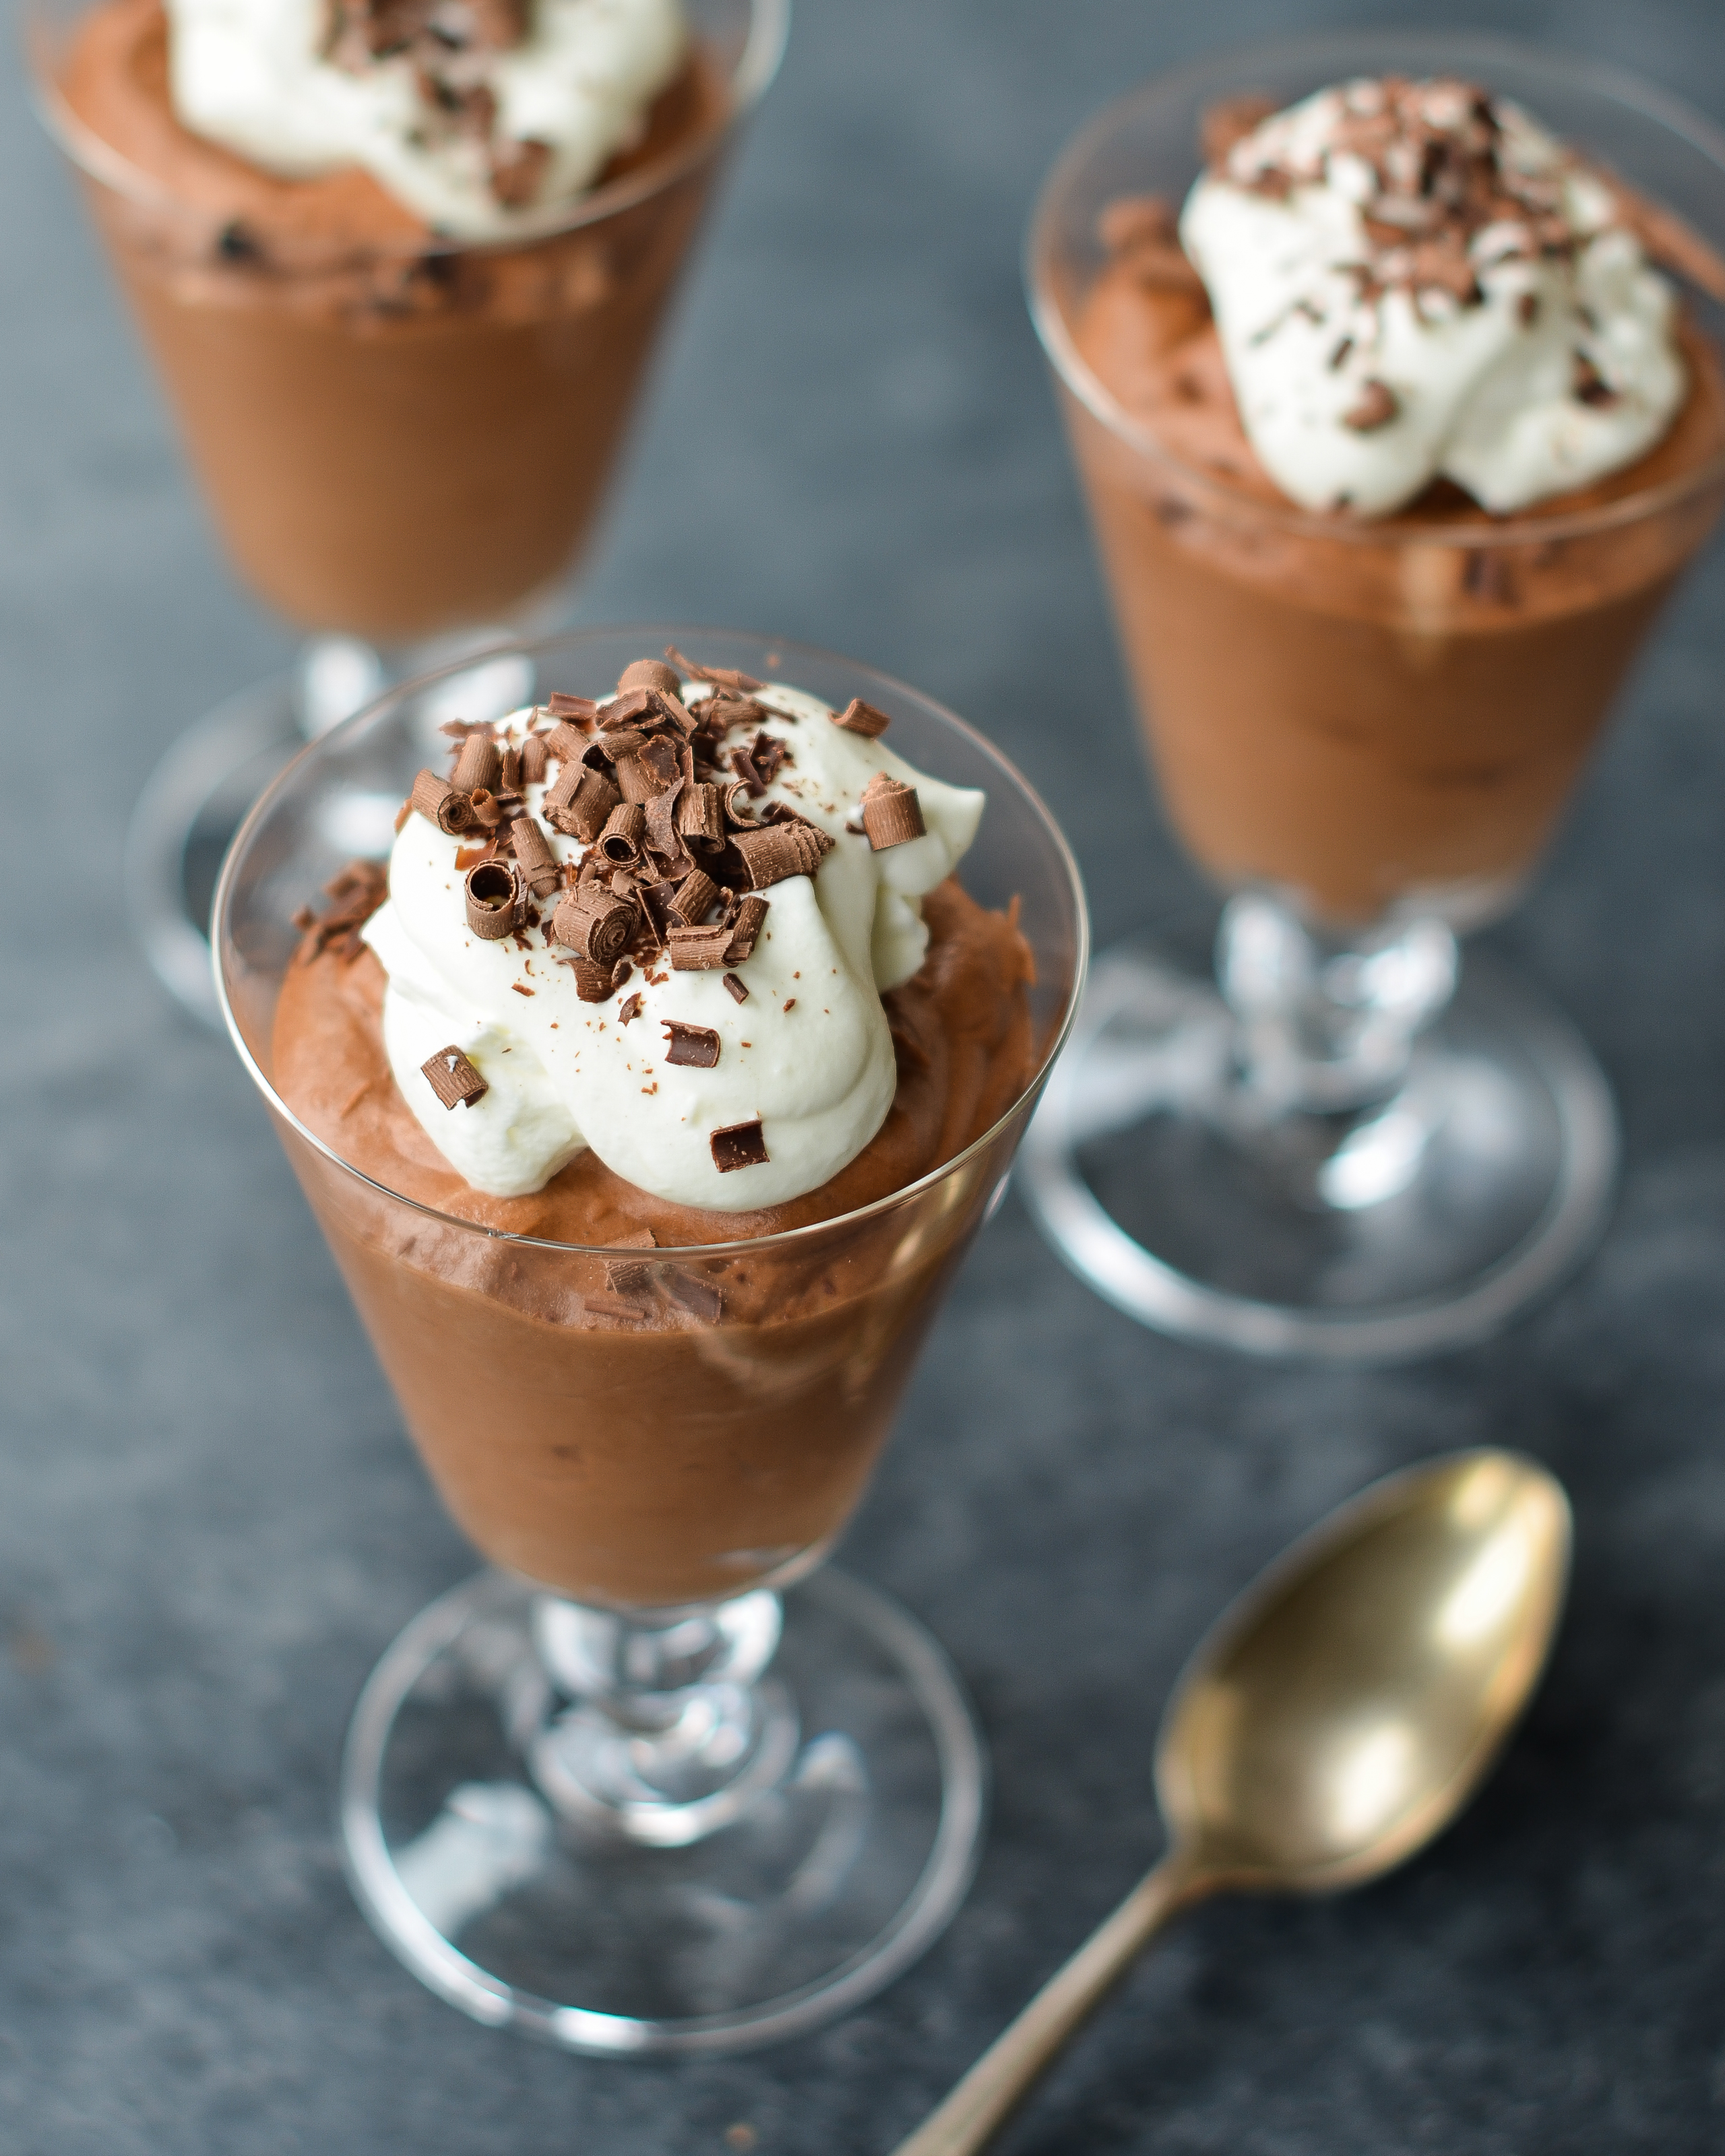 The Best Chocolate Mousse